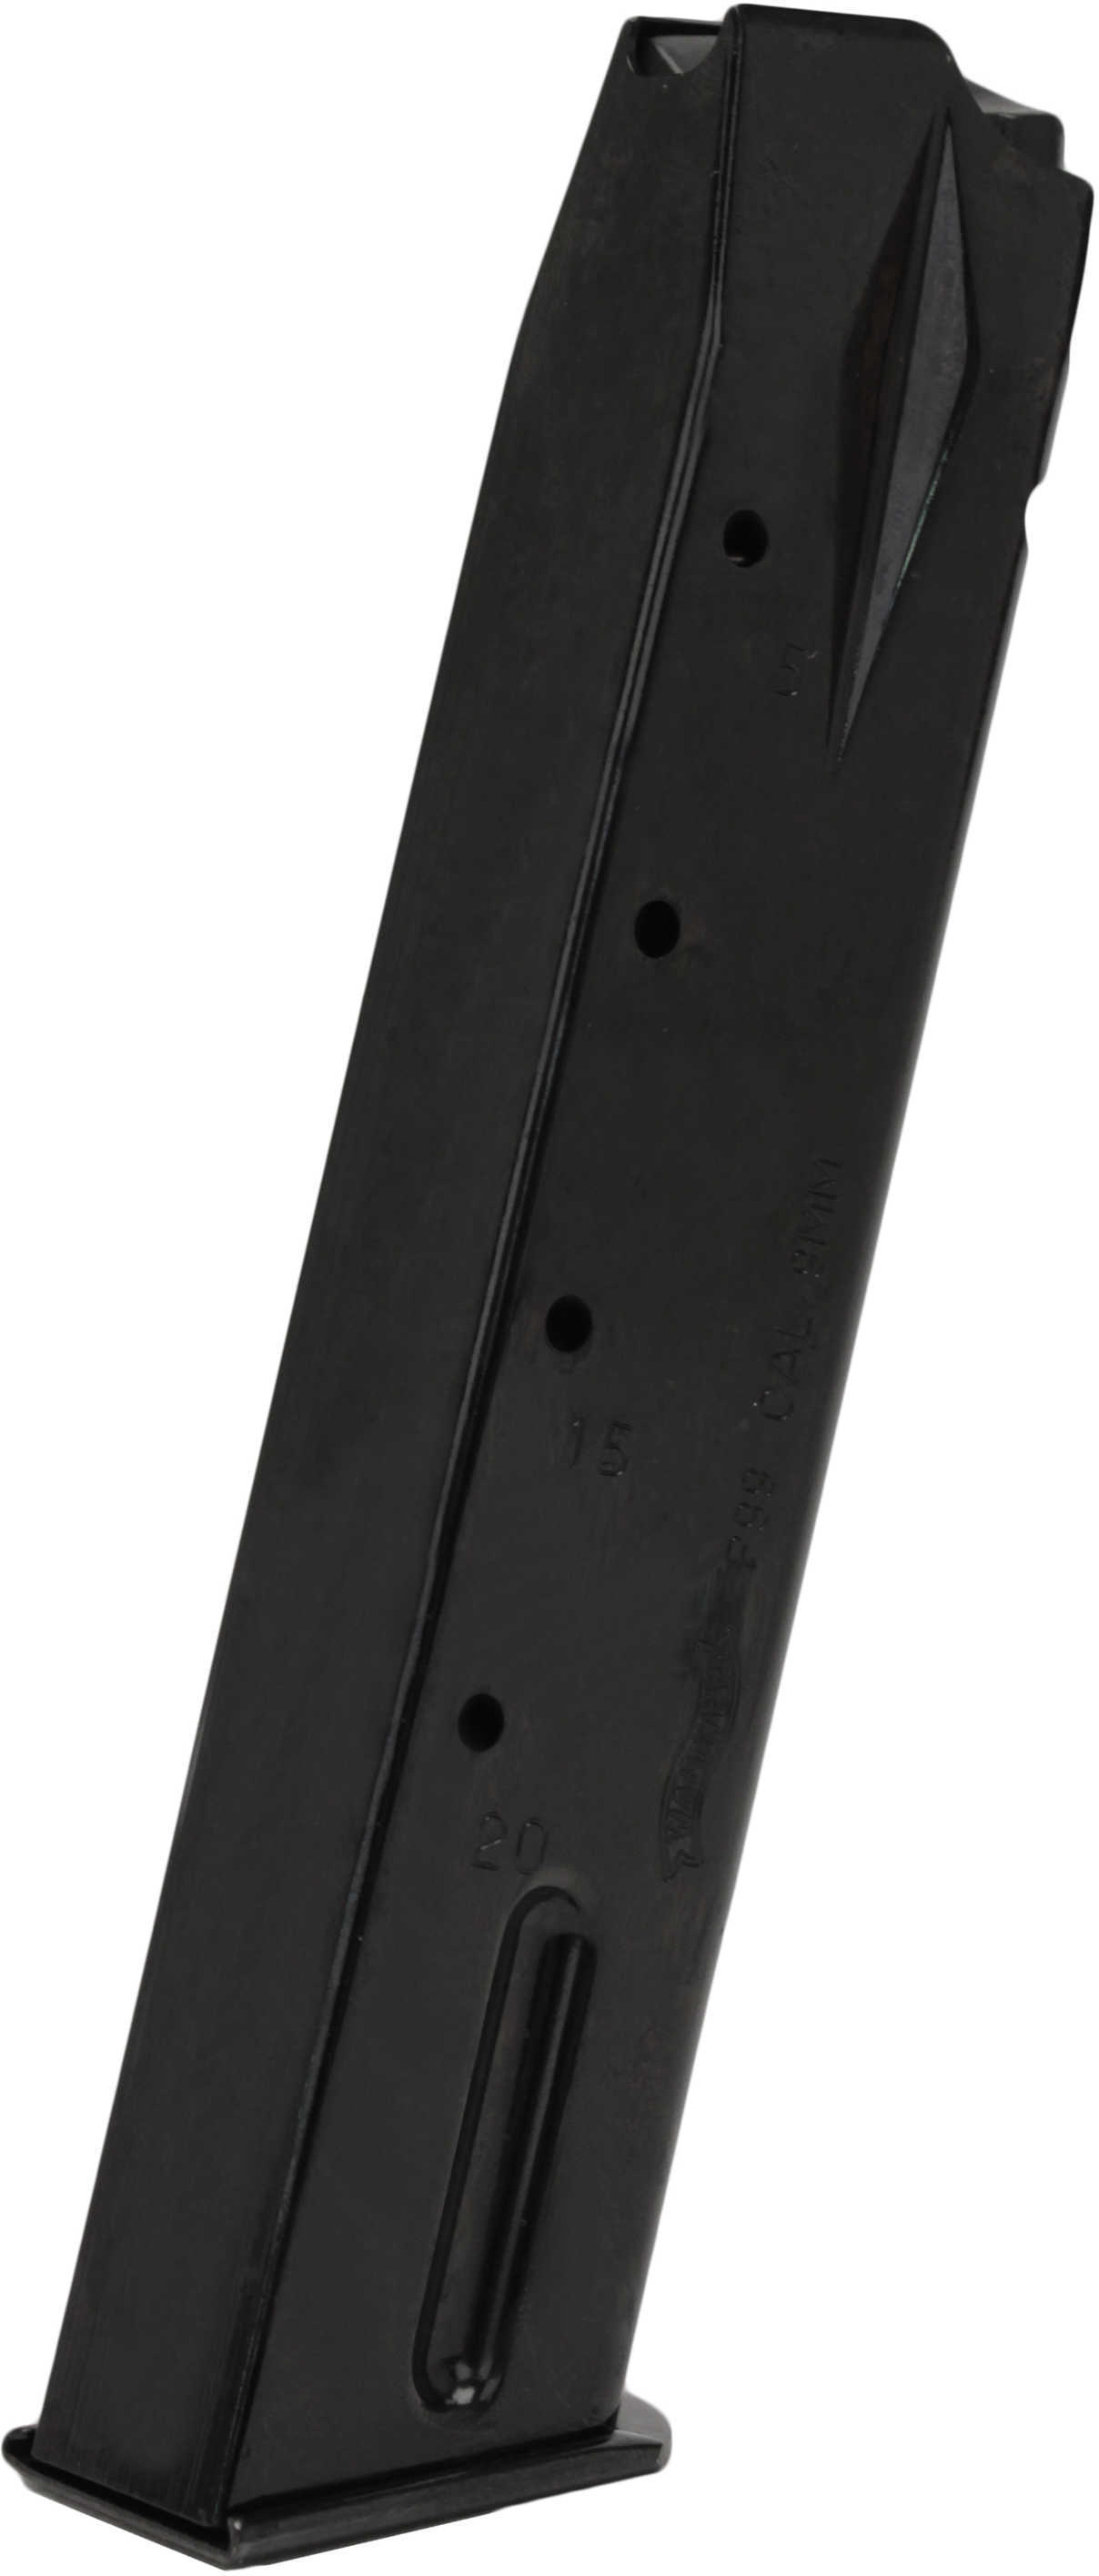 Walther Arms 9mm 20-Round P99 Magazine Black Md: 2796546